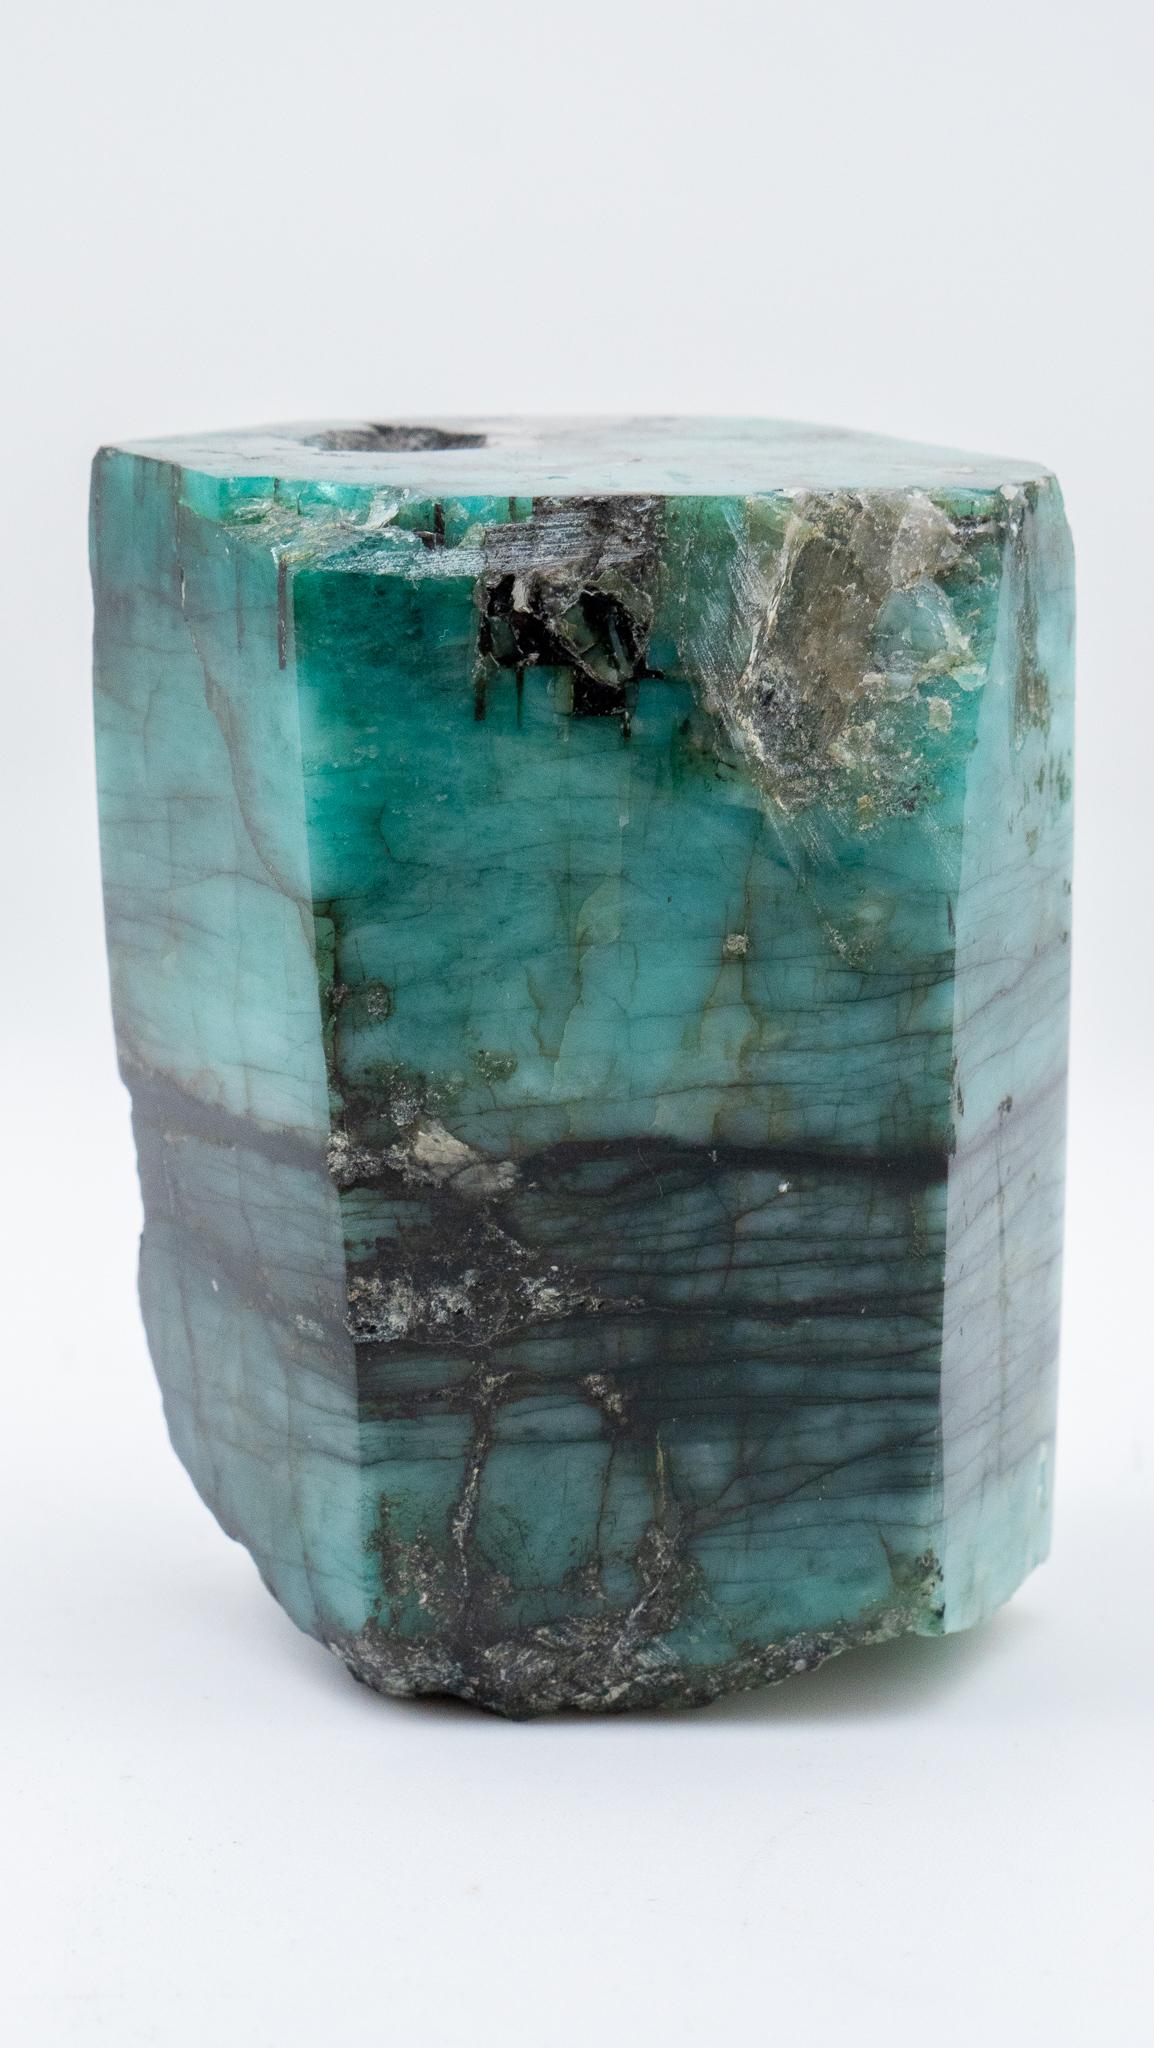 Raw polished emerald specimen. This is a beautiful stone with smoky rock crystal matrix that shimmers. This green semi precious stone, known for its rarity, was mined in Colombia and would make for a great gift for any stone enthusiast.